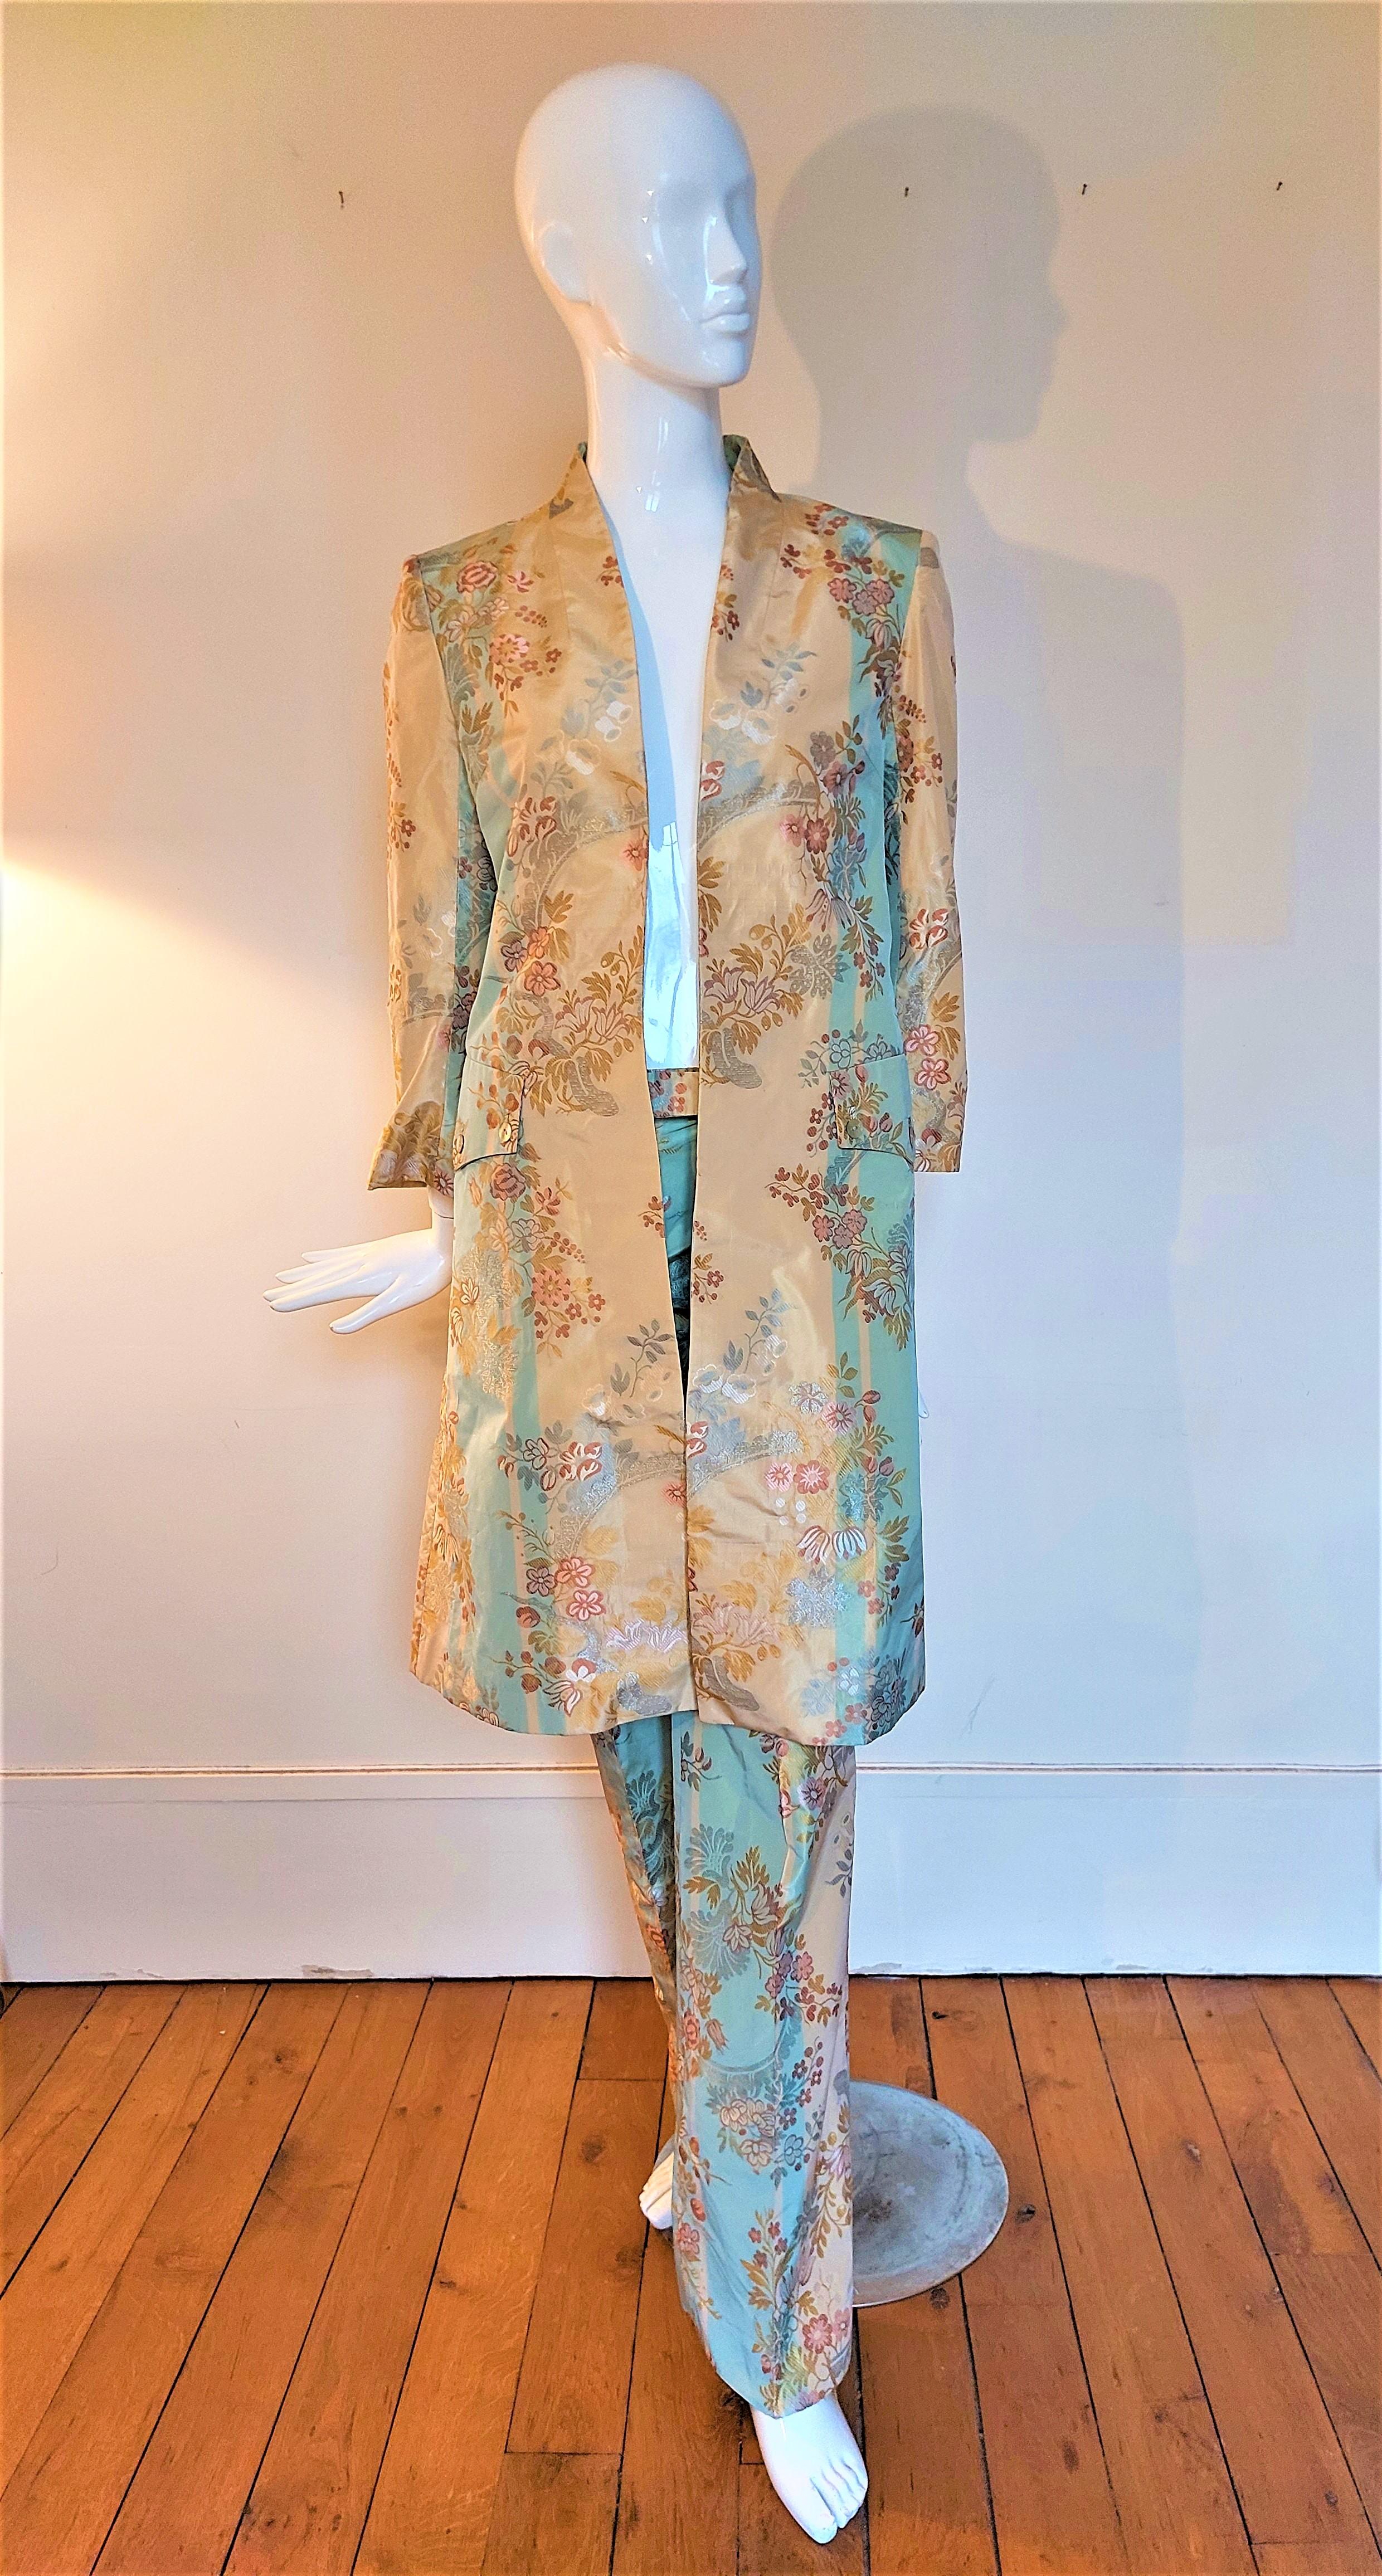 2000S ALEXANDER MCQUEEN Silk Brocade Frock Coat Jacket Trousers Pants Suit Set From The Shipwreck Collection Irere.

Excellent Condition.
Museum Piece.
Fits for XS/S.
Measurements:
Jacket:
Shoulder to Shoulder: 45 cm – 17,7 inch
Armpit to Armpit: 48